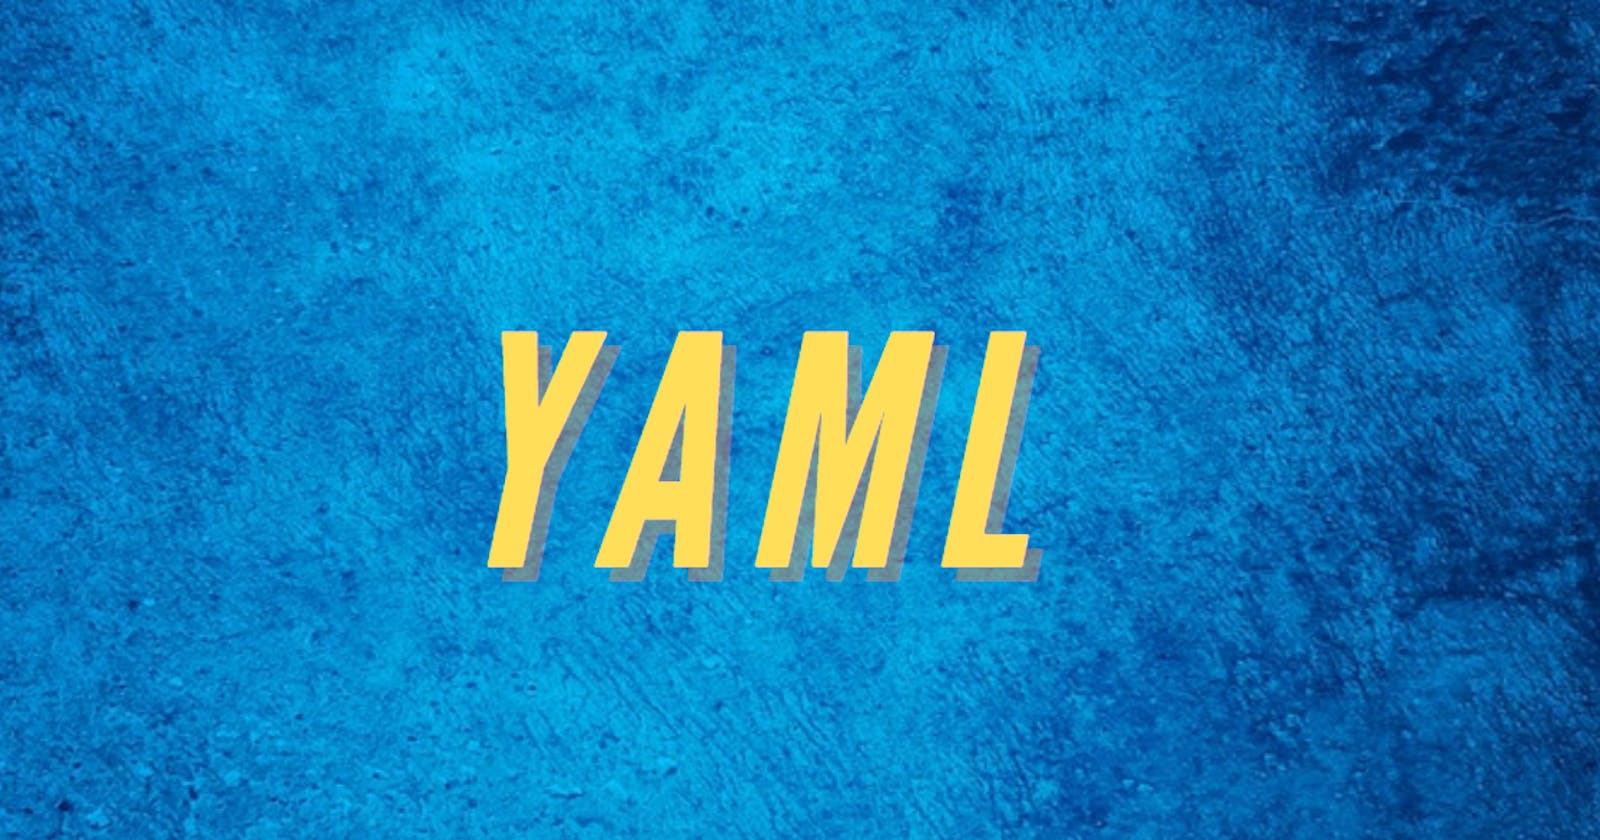 What is YAML?